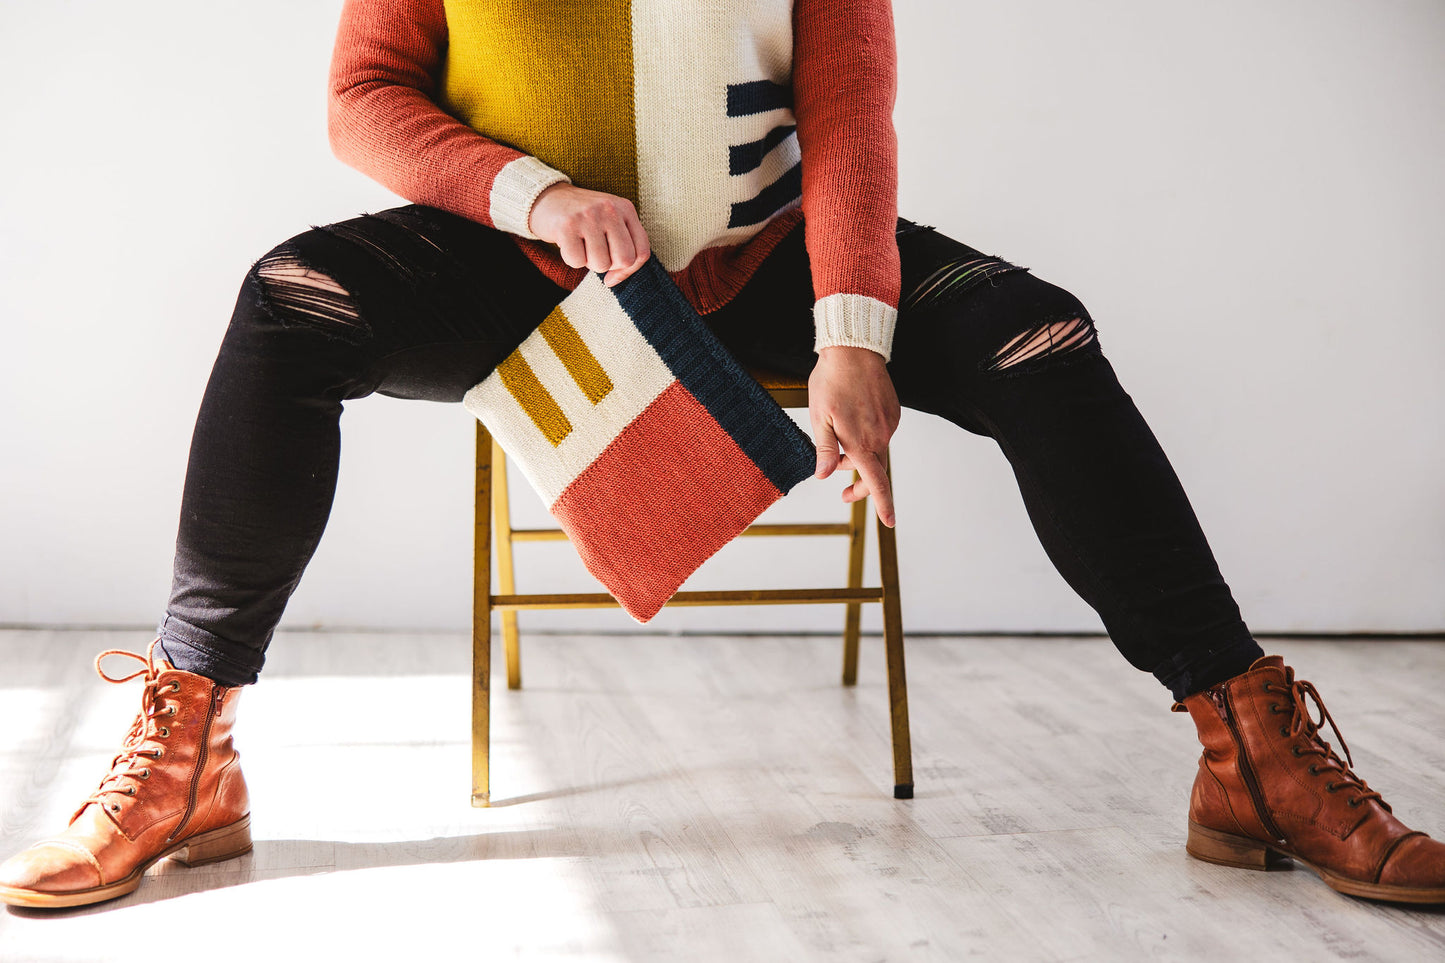 Seen from the shoulders down, Jen sits on a chair, holding a notions case, knit in pink, ochre, navy blue, and cream intarsia. She wears a sweater, knit in the same intarsia design in matching colours, with black ripped jeans and brown boots.